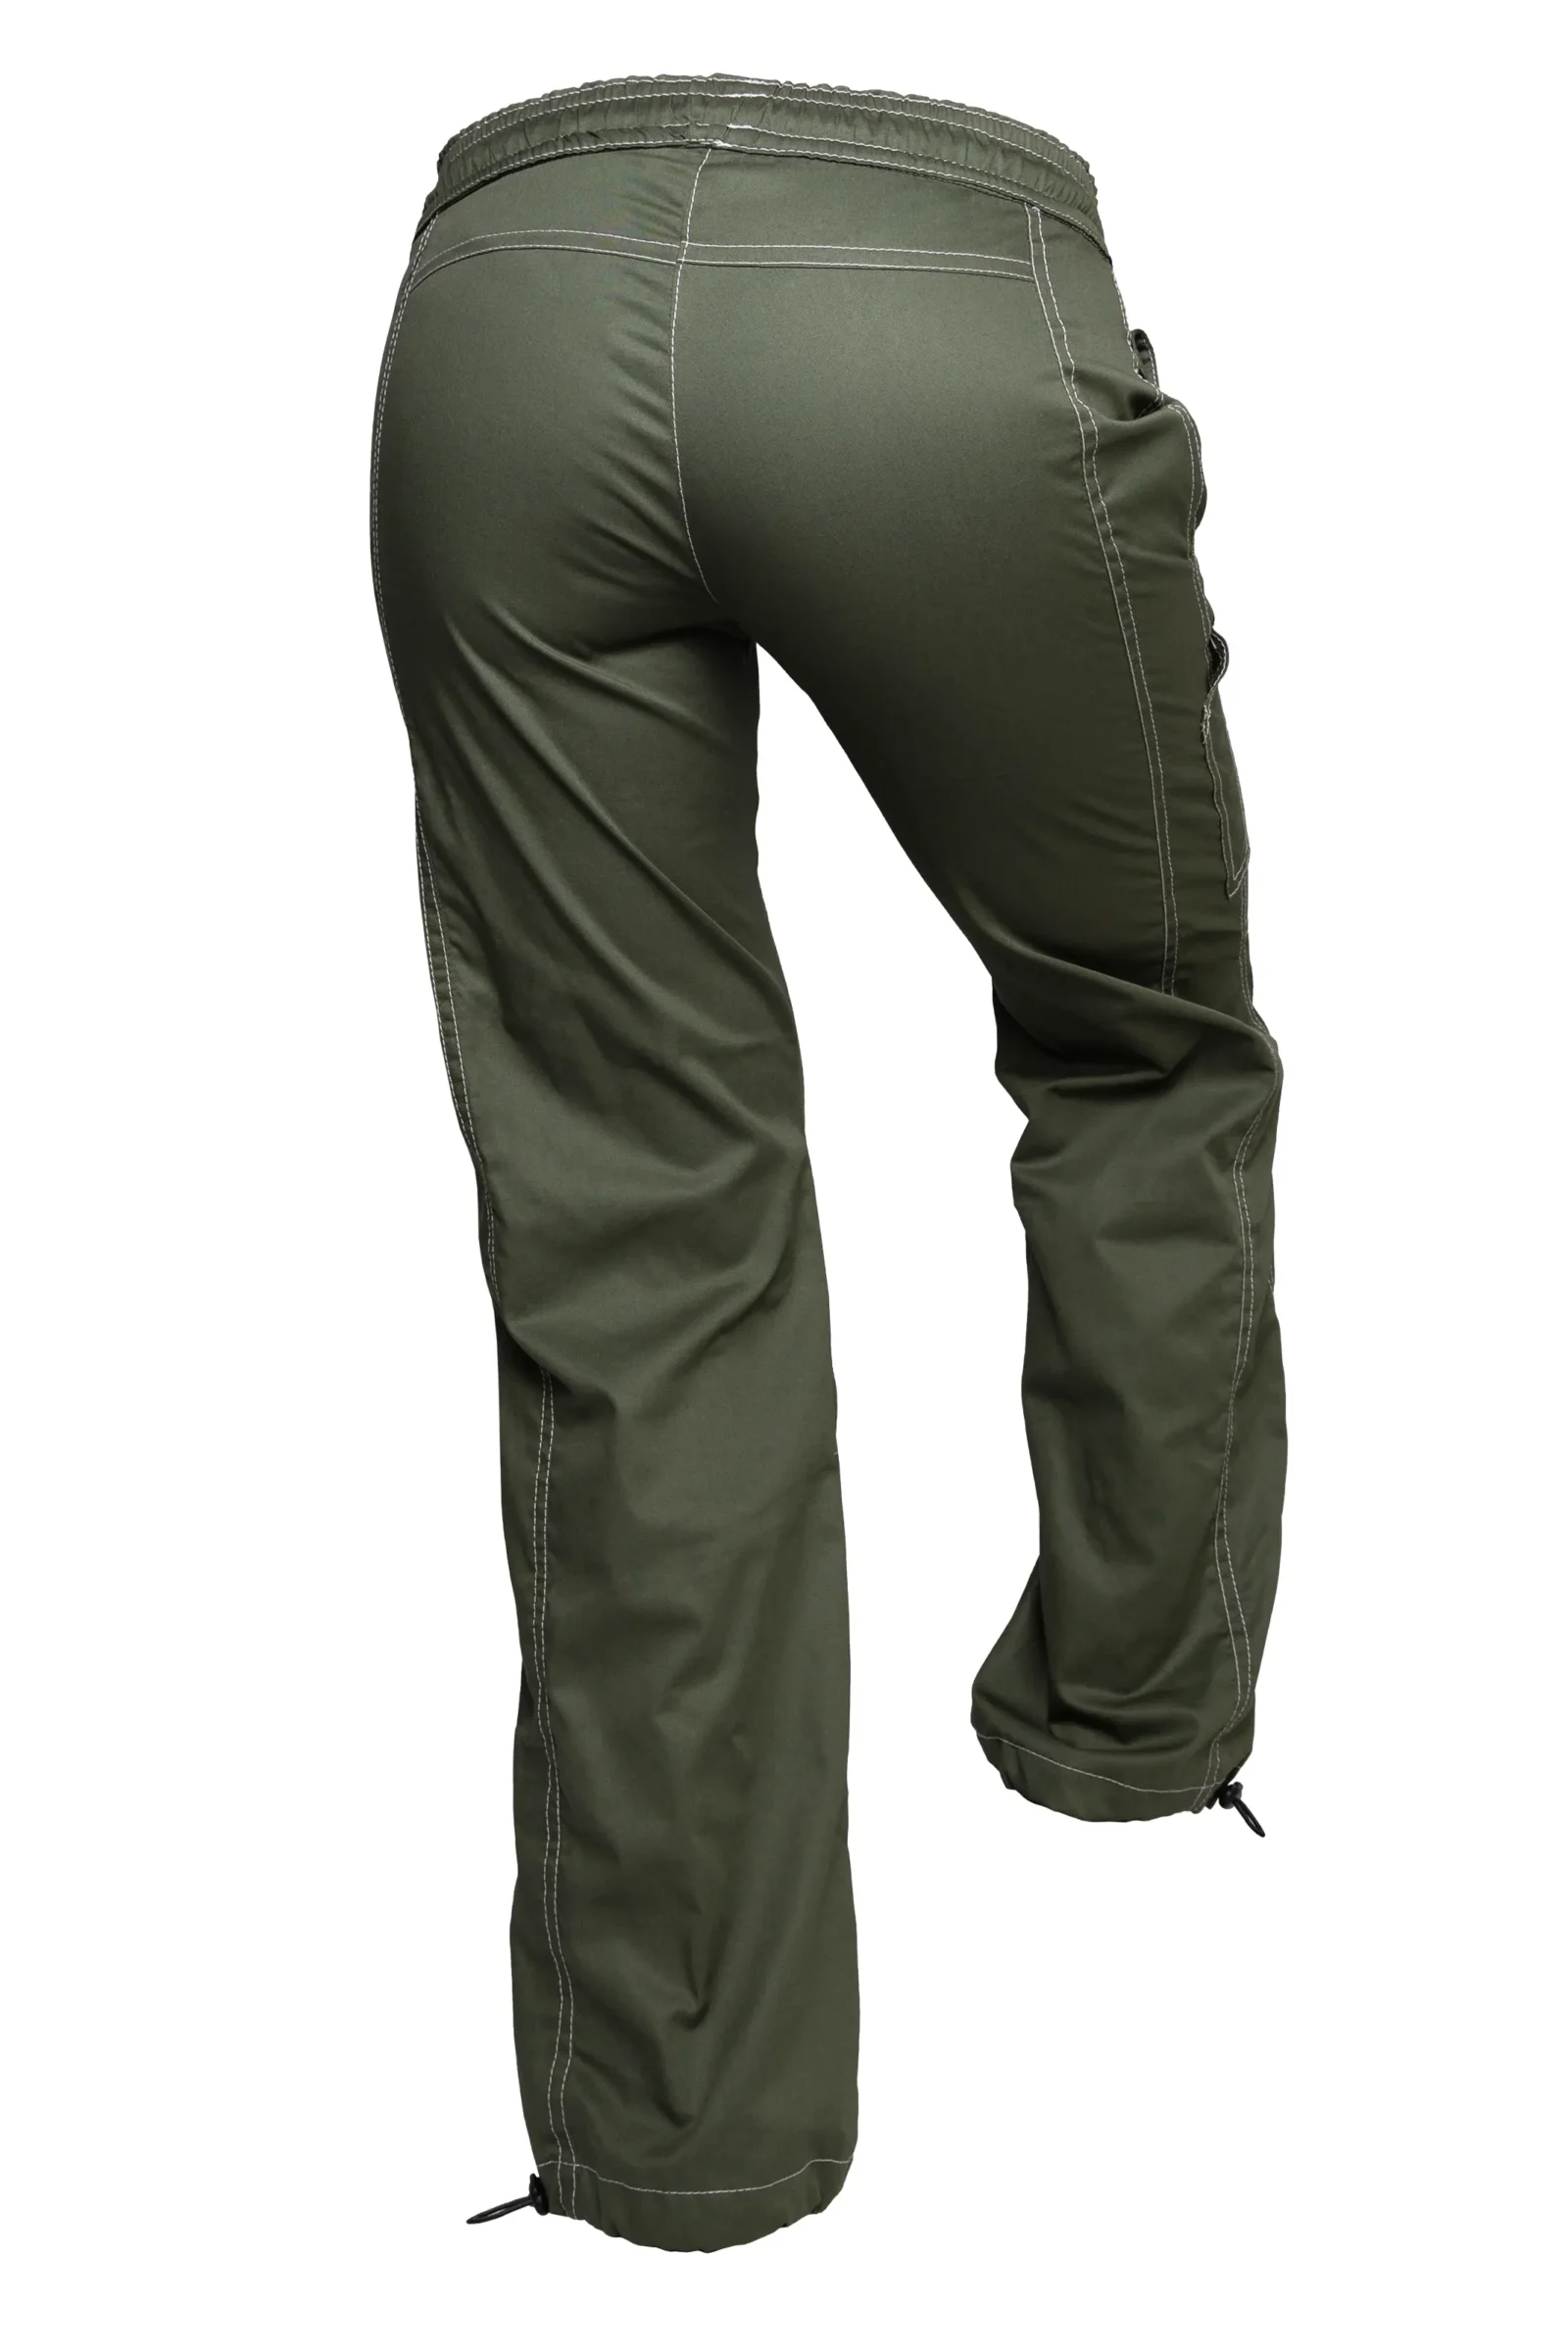 Women's sports trousers - military green - VIOLET Monvic